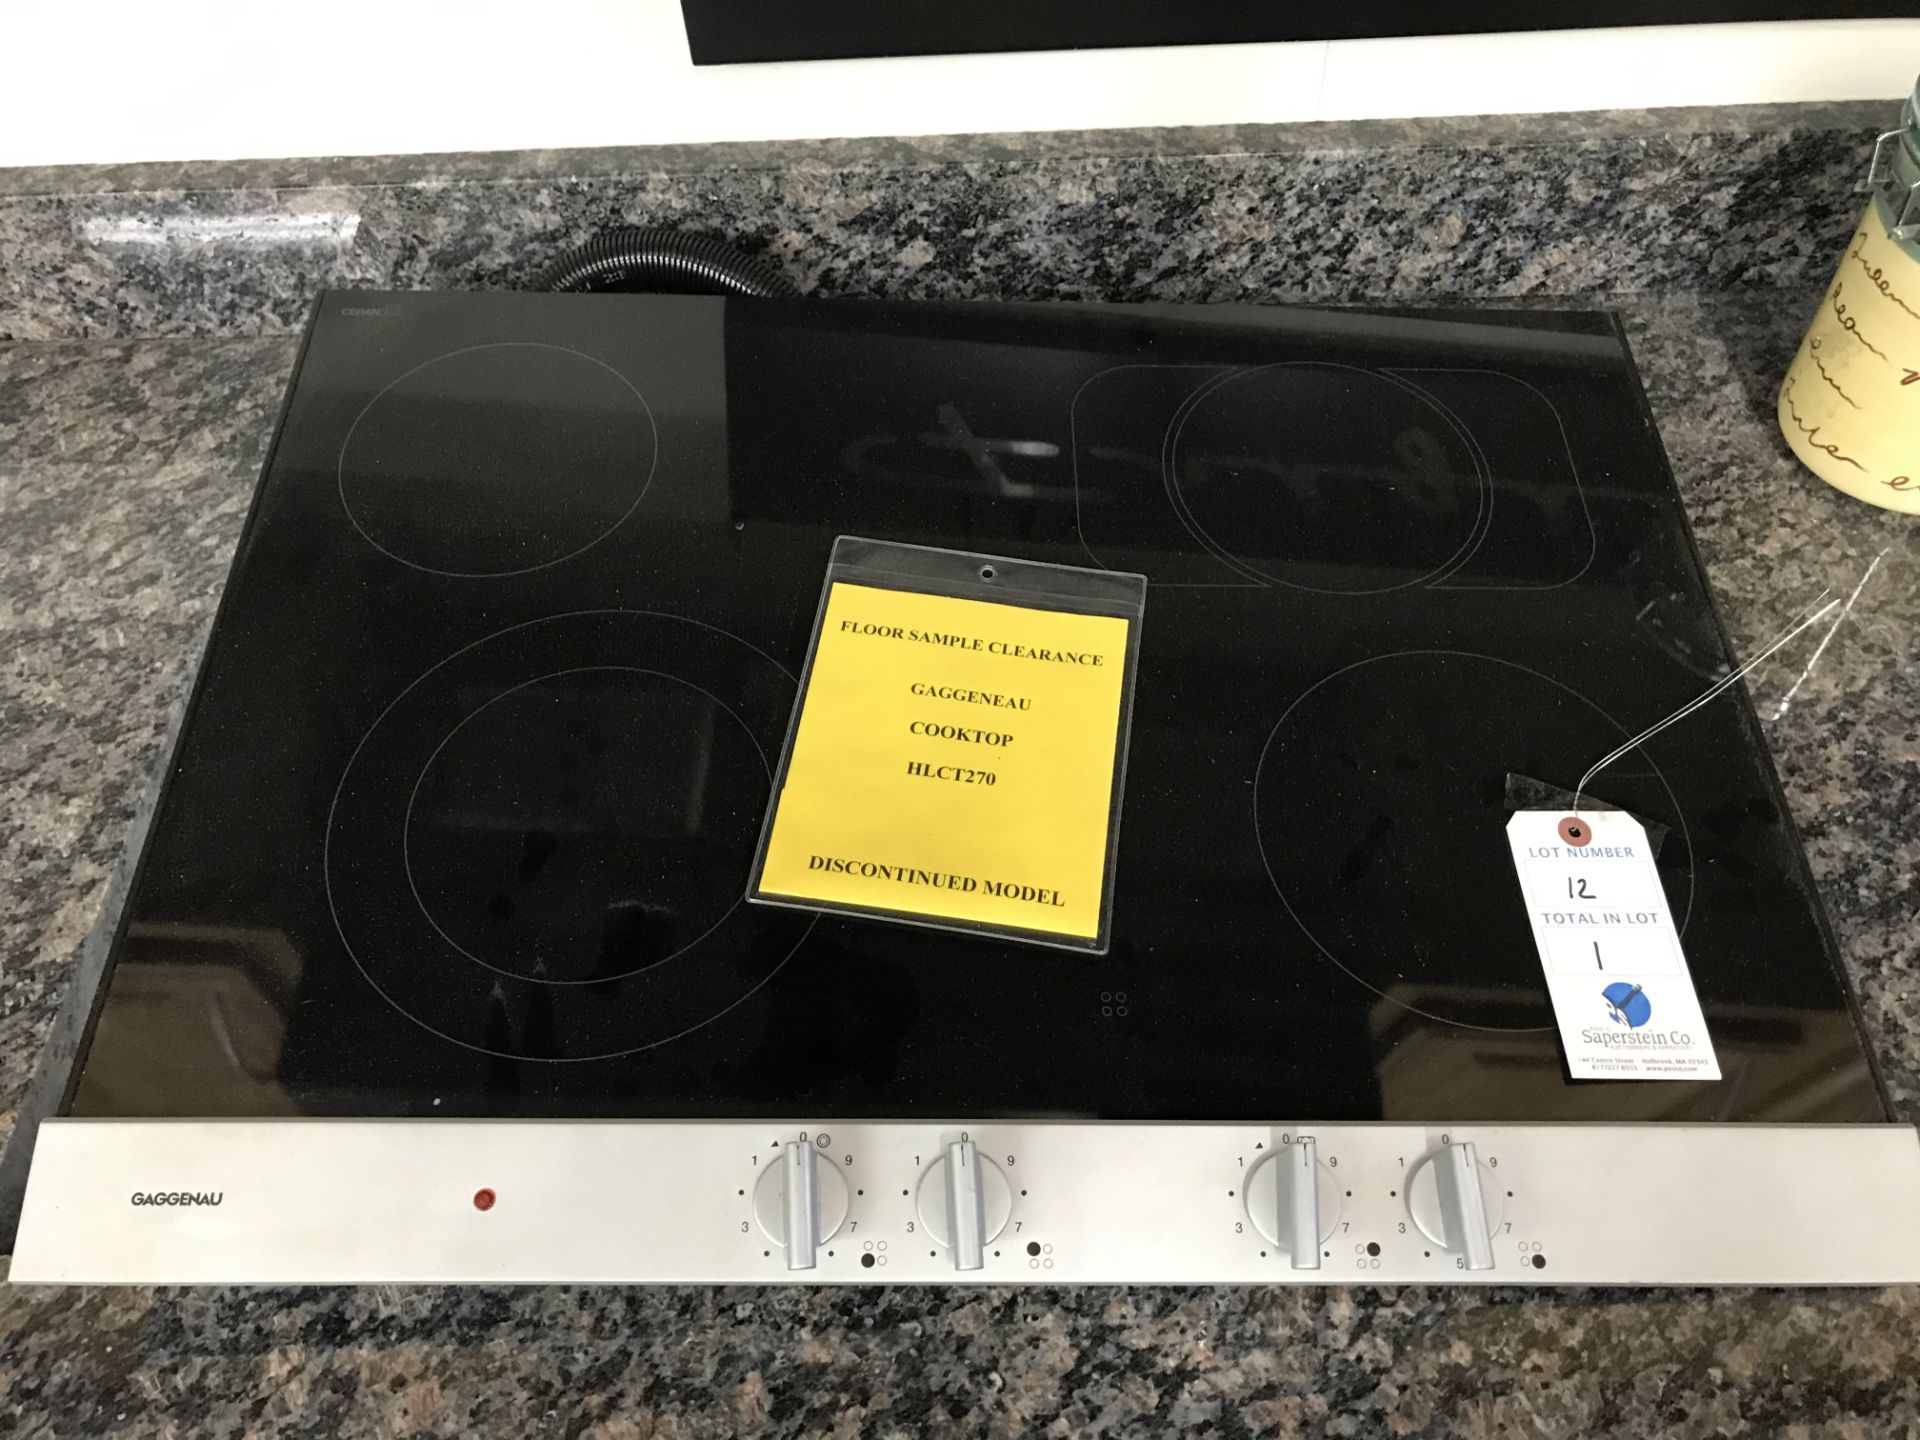 Gaggenau #HLCT270 4 Burner Electric Cook Top (Discontinued) 27.5"W x 20.25"D